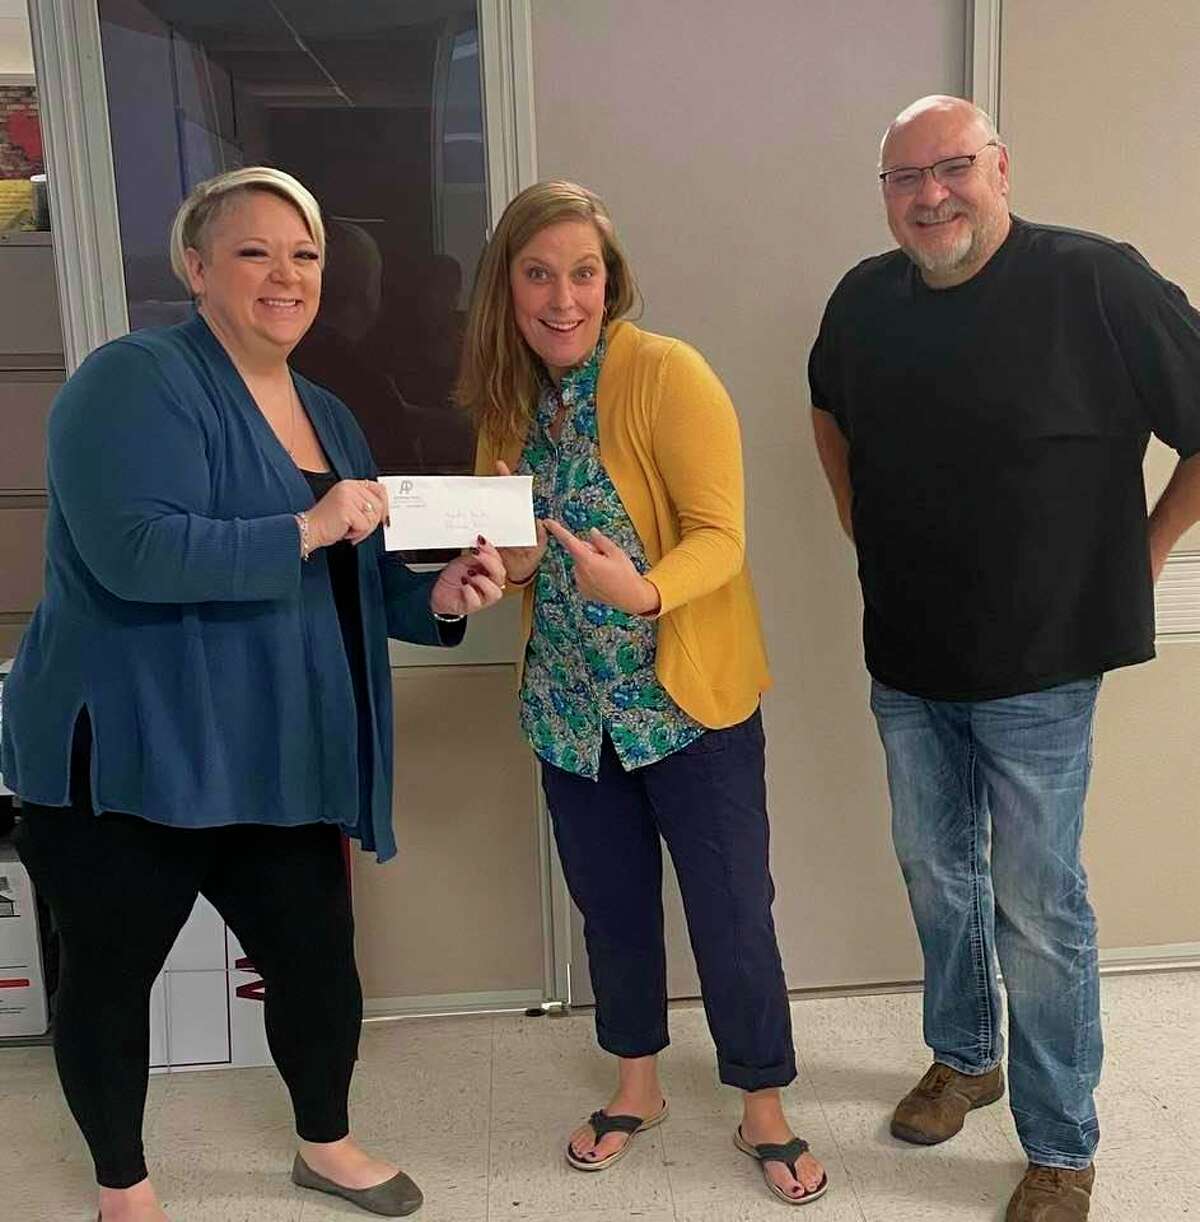 Mayor Chris Emerick (left) and Evart Chamber of Commerce director Eric Schmidt (right) present a donation check to Jessica Kolenda (center), Evart High School principal, for the Promise Plus program. (Submitted photo)